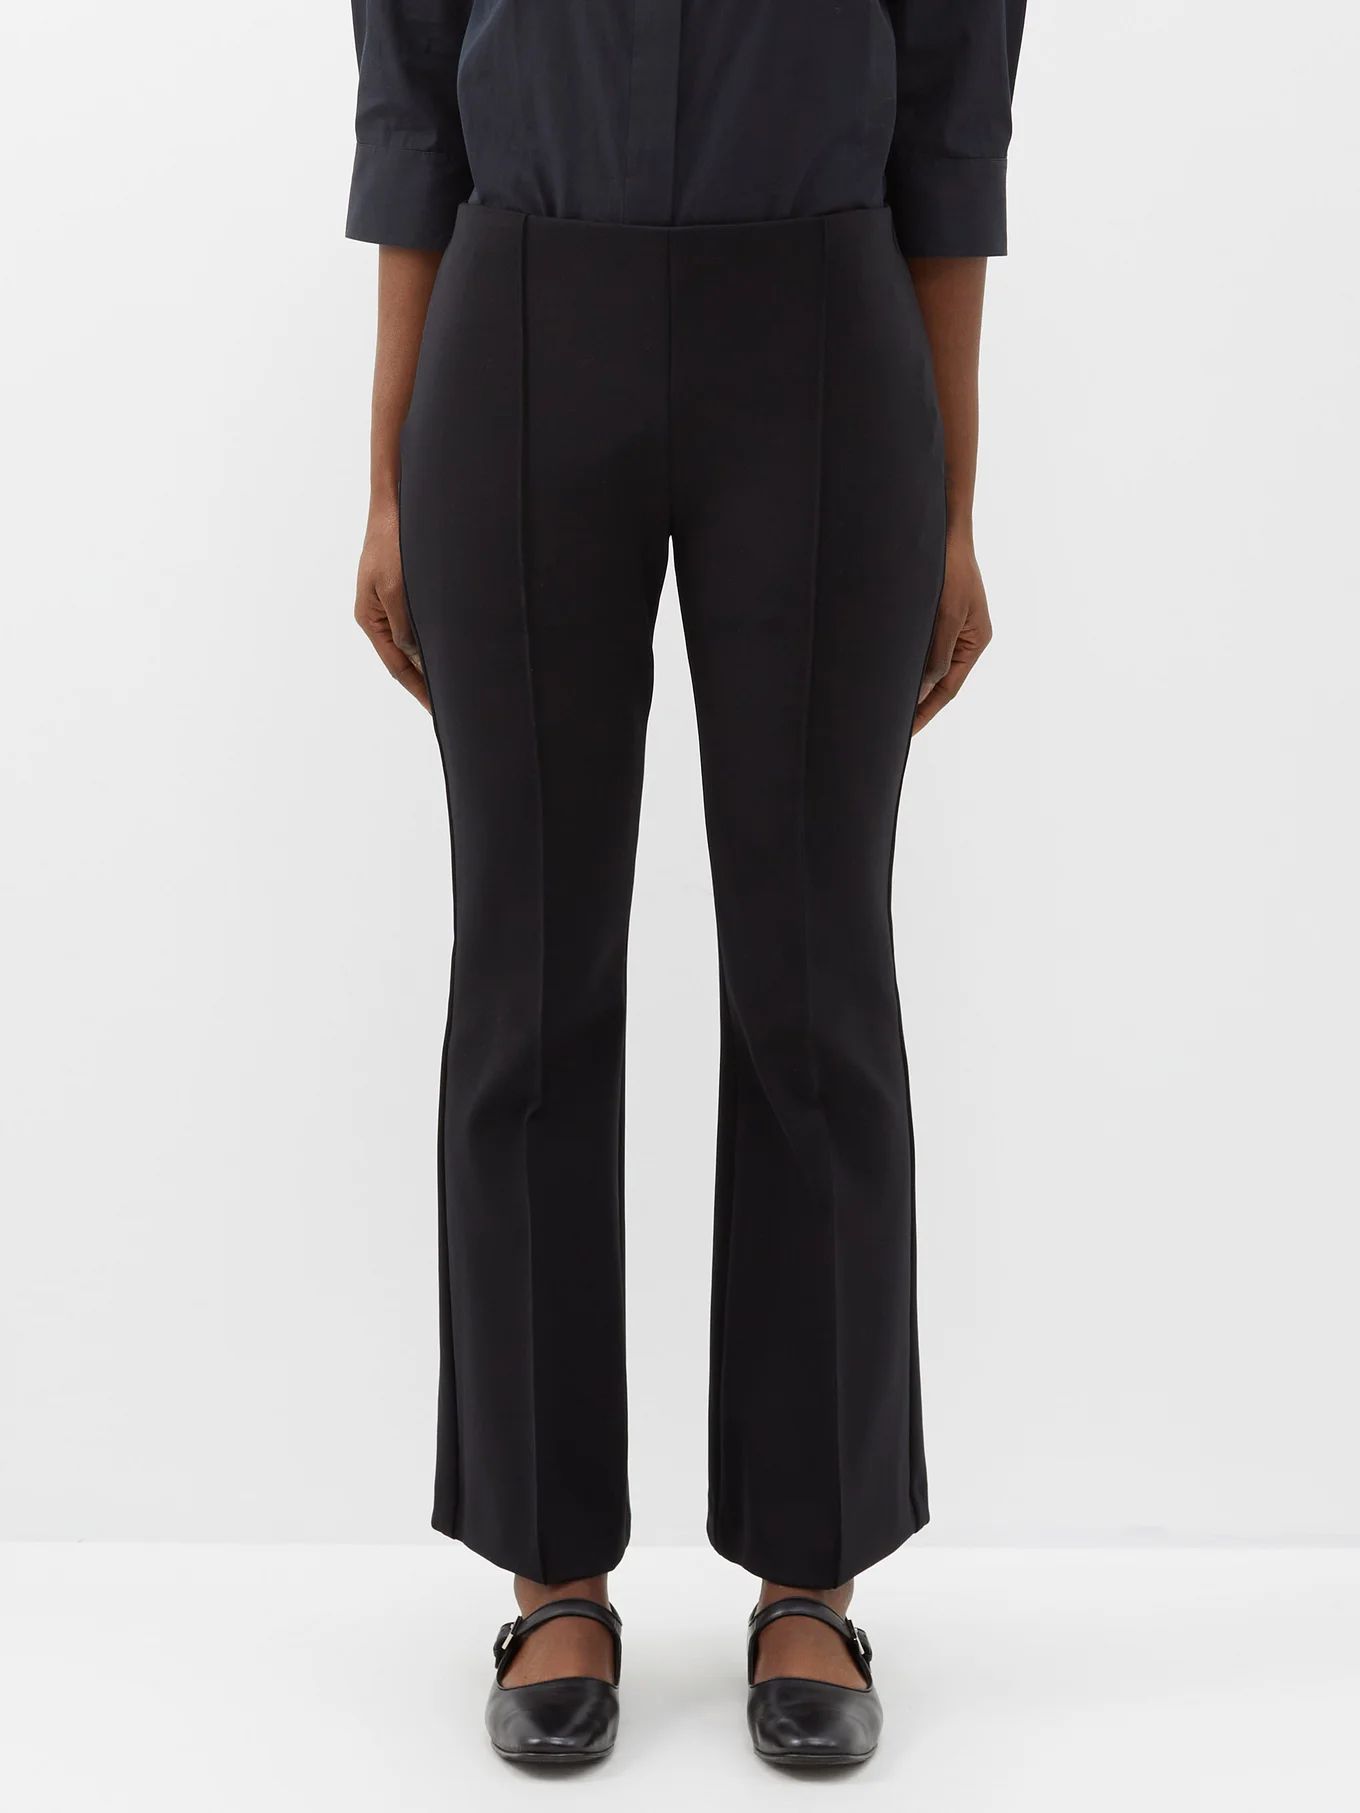 Beca pintucked flared trousers | The Row | Matches (EU)